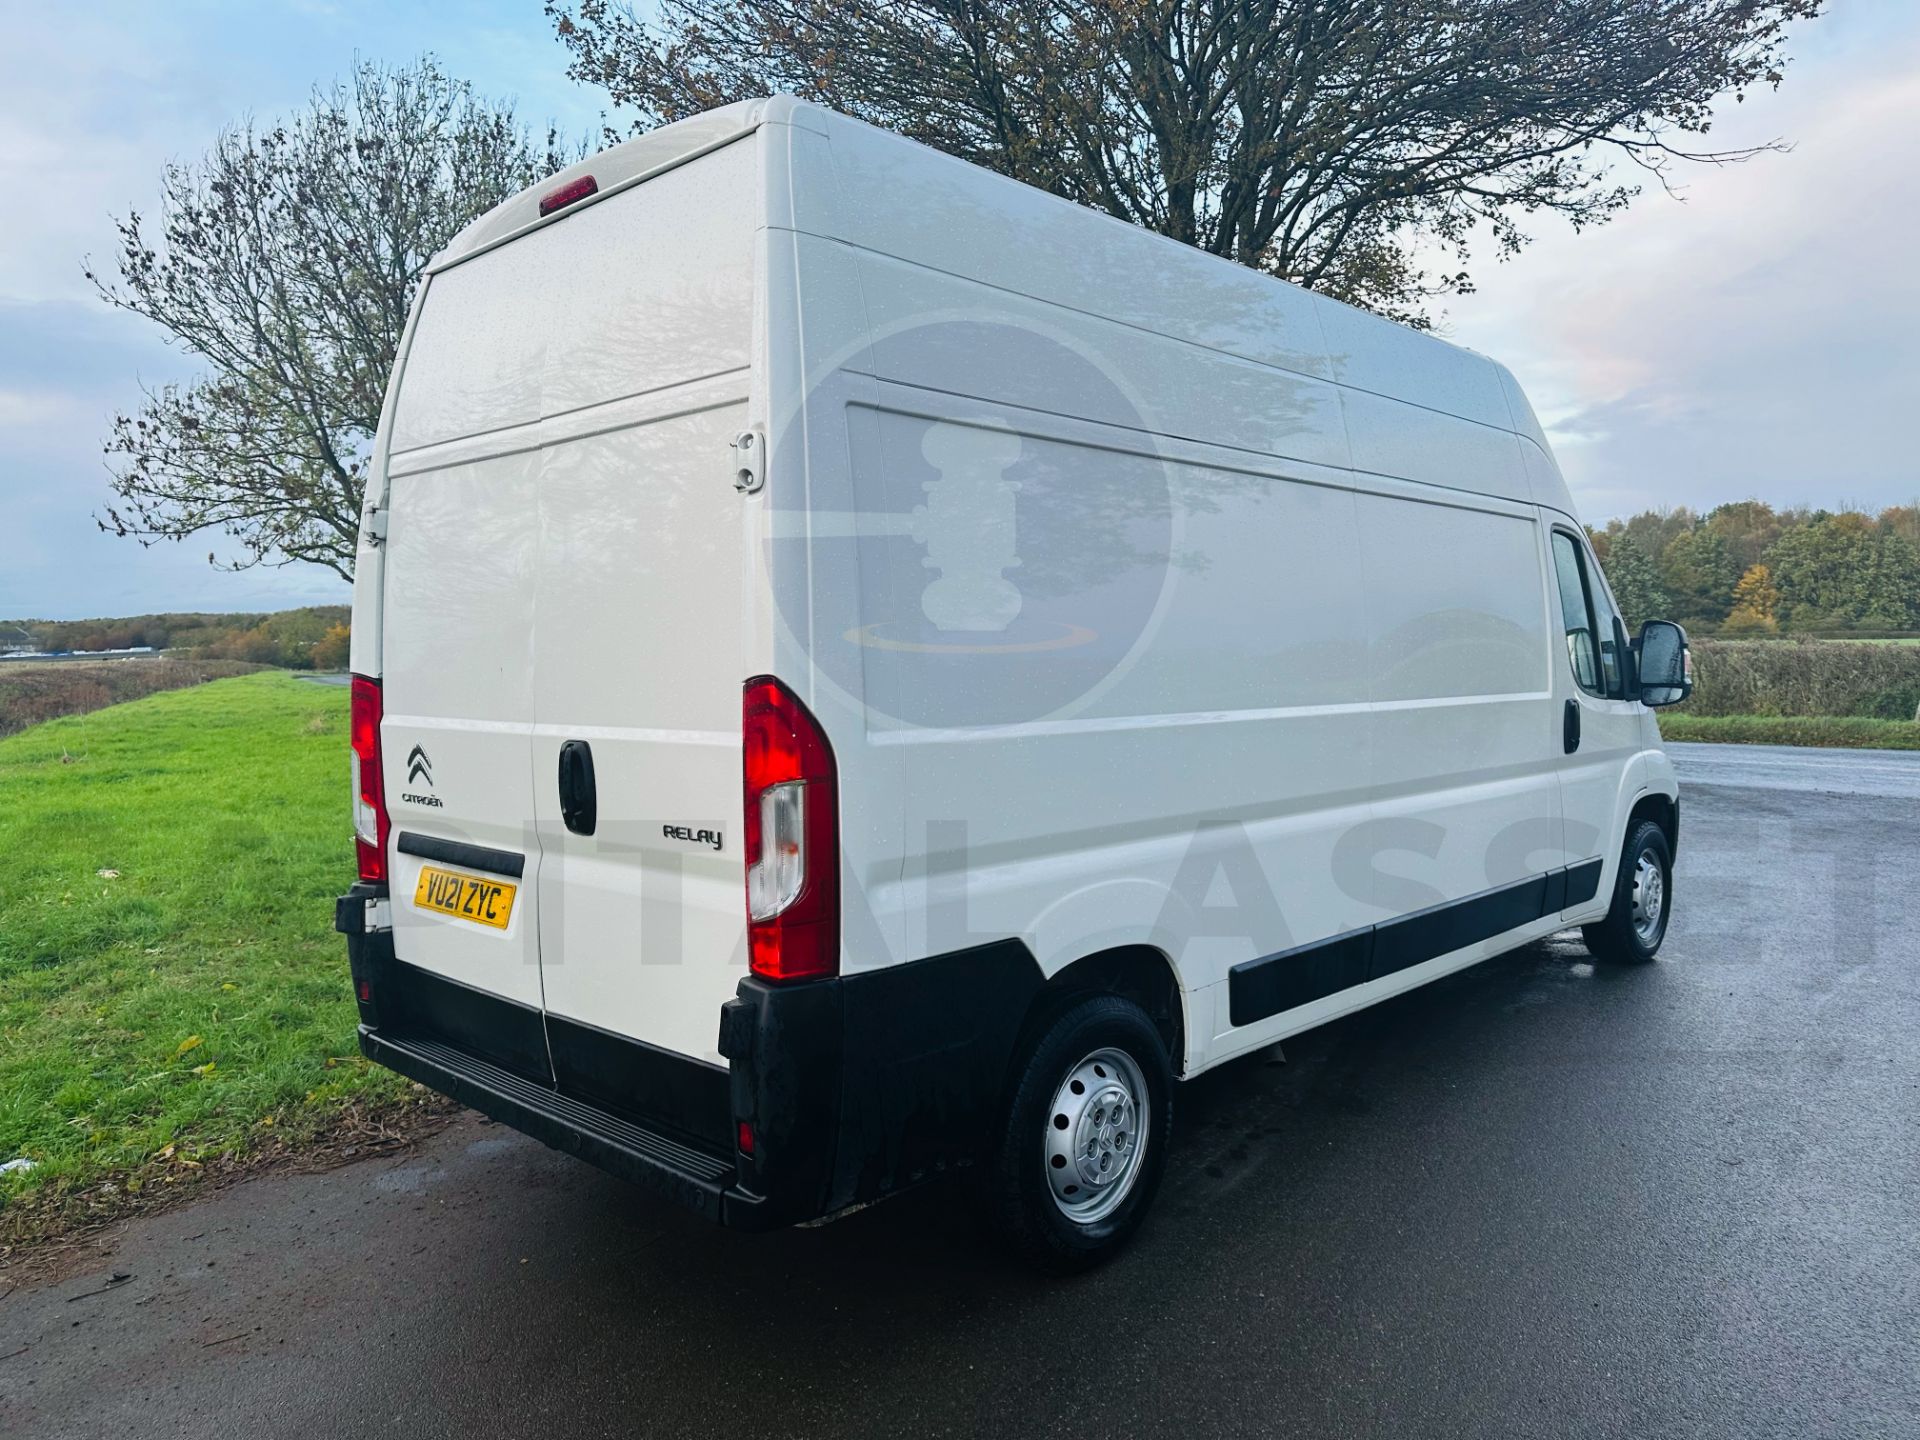 (ON SALE) CITROEN RELAY *ENTERPRISE EDITION* LWB EXTRA HI-ROOF (2021 -EURO 6) 2.2 BLUE HDI - 6 SPEED - Image 8 of 27